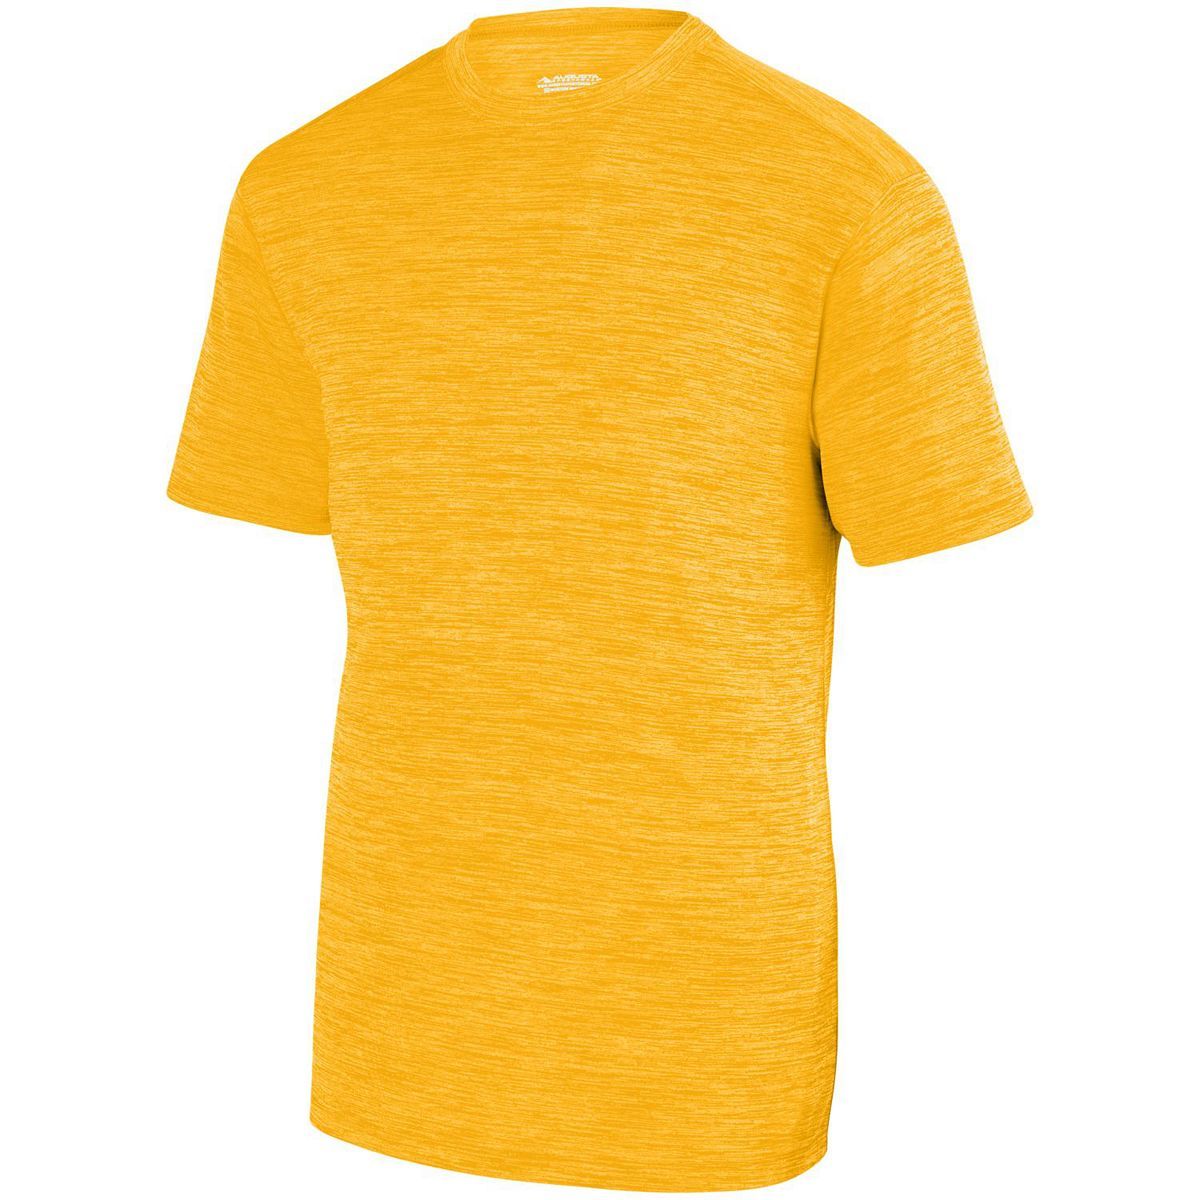 Augusta Sportswear Shadow Tonal Heather Training Tee in Gold  -Part of the Adult, Adult-Tee-Shirt, T-Shirts, Augusta-Products, Shirts, Tonal-Fleece-Collection product lines at KanaleyCreations.com